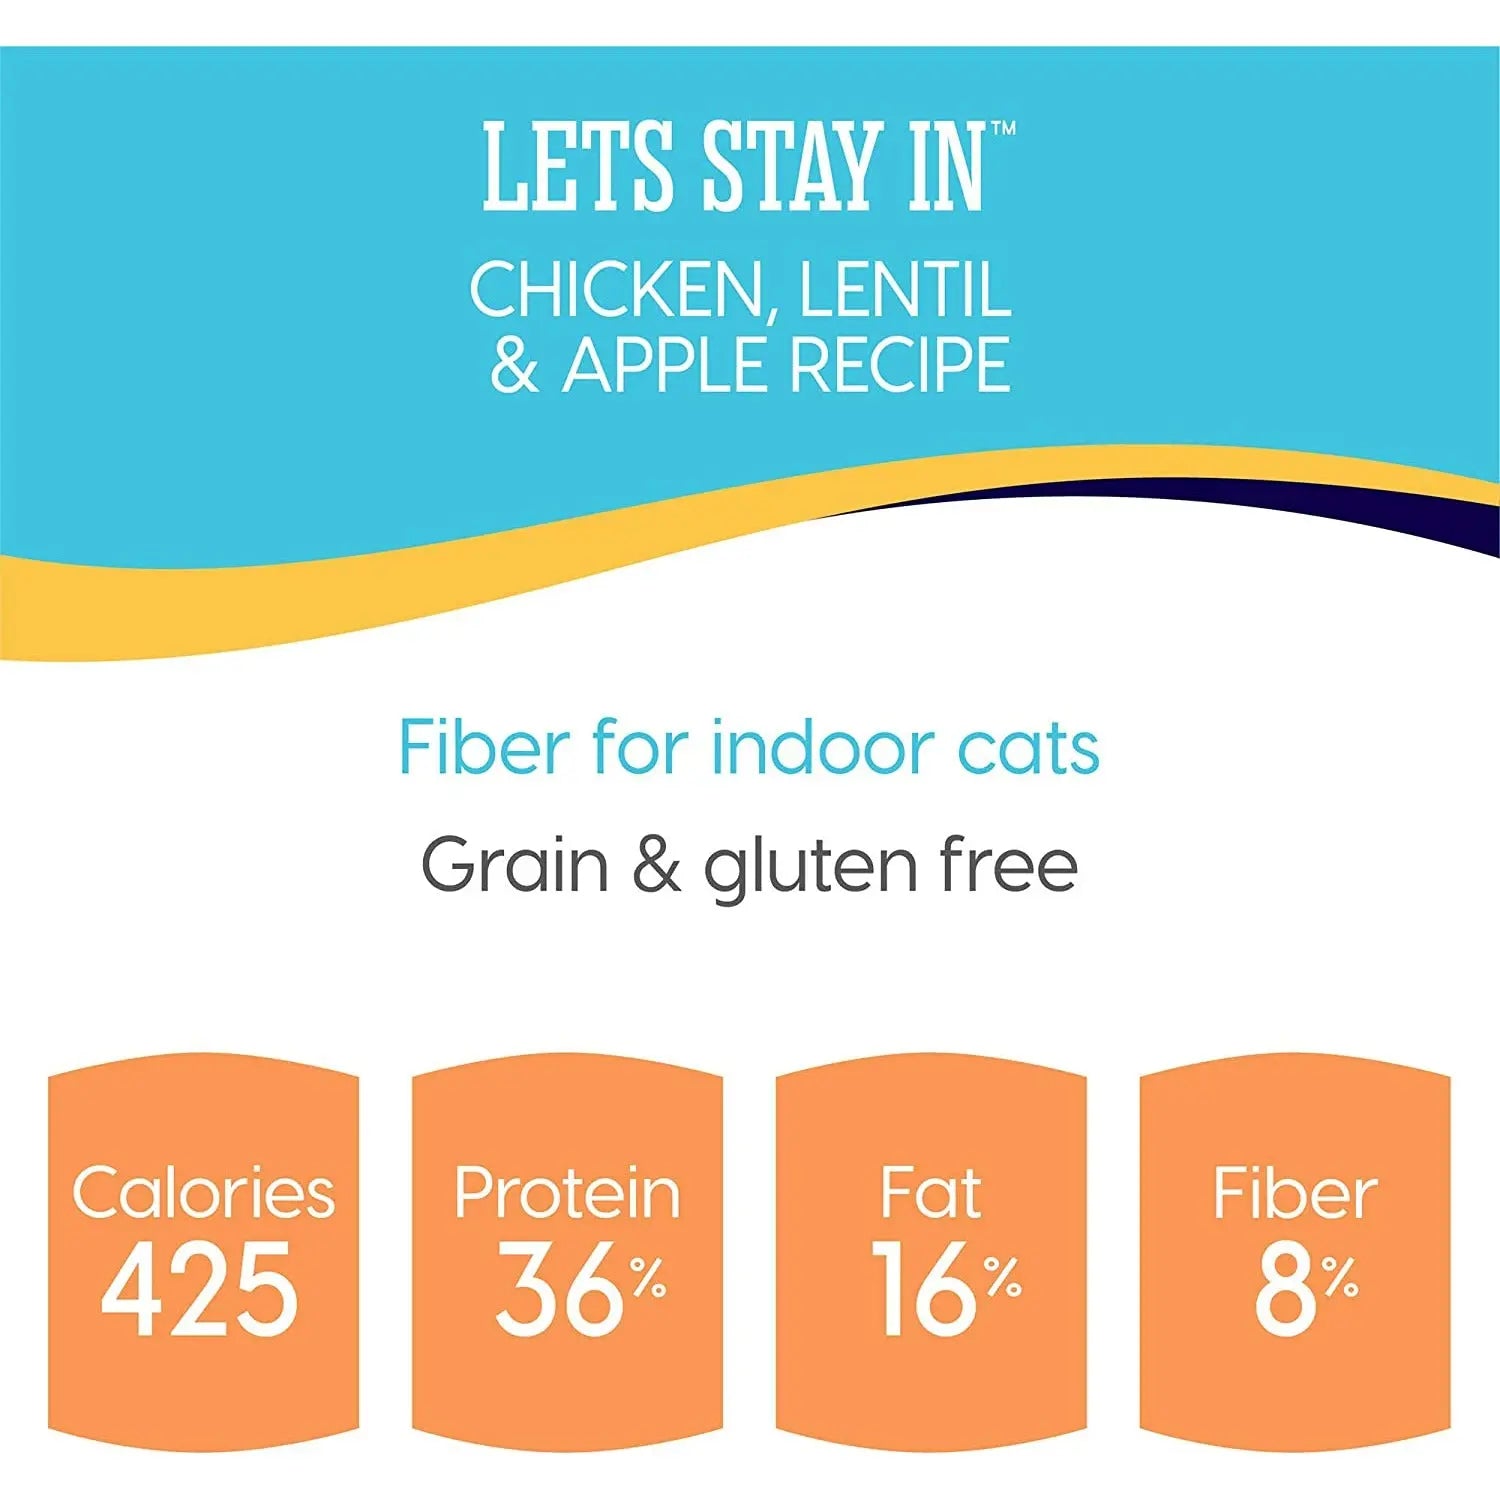 Solid Gold® Let’s Stay In™ Grain Free Chicken, Lentils & Apples Recipe Indoor Cat Food Solid Gold